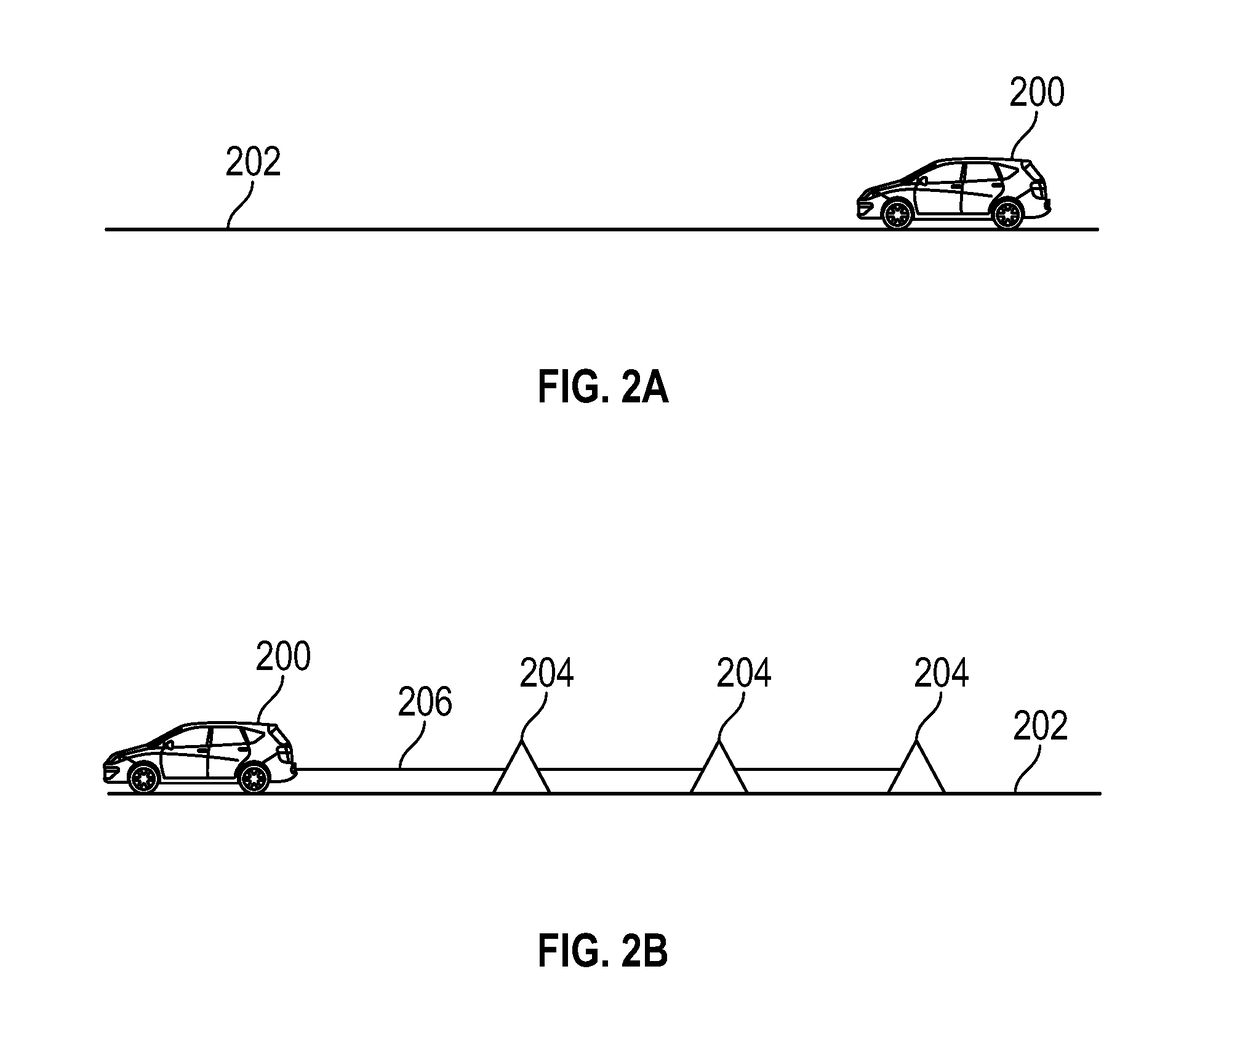 Systems and methods for automatically deploying road hazard indicators